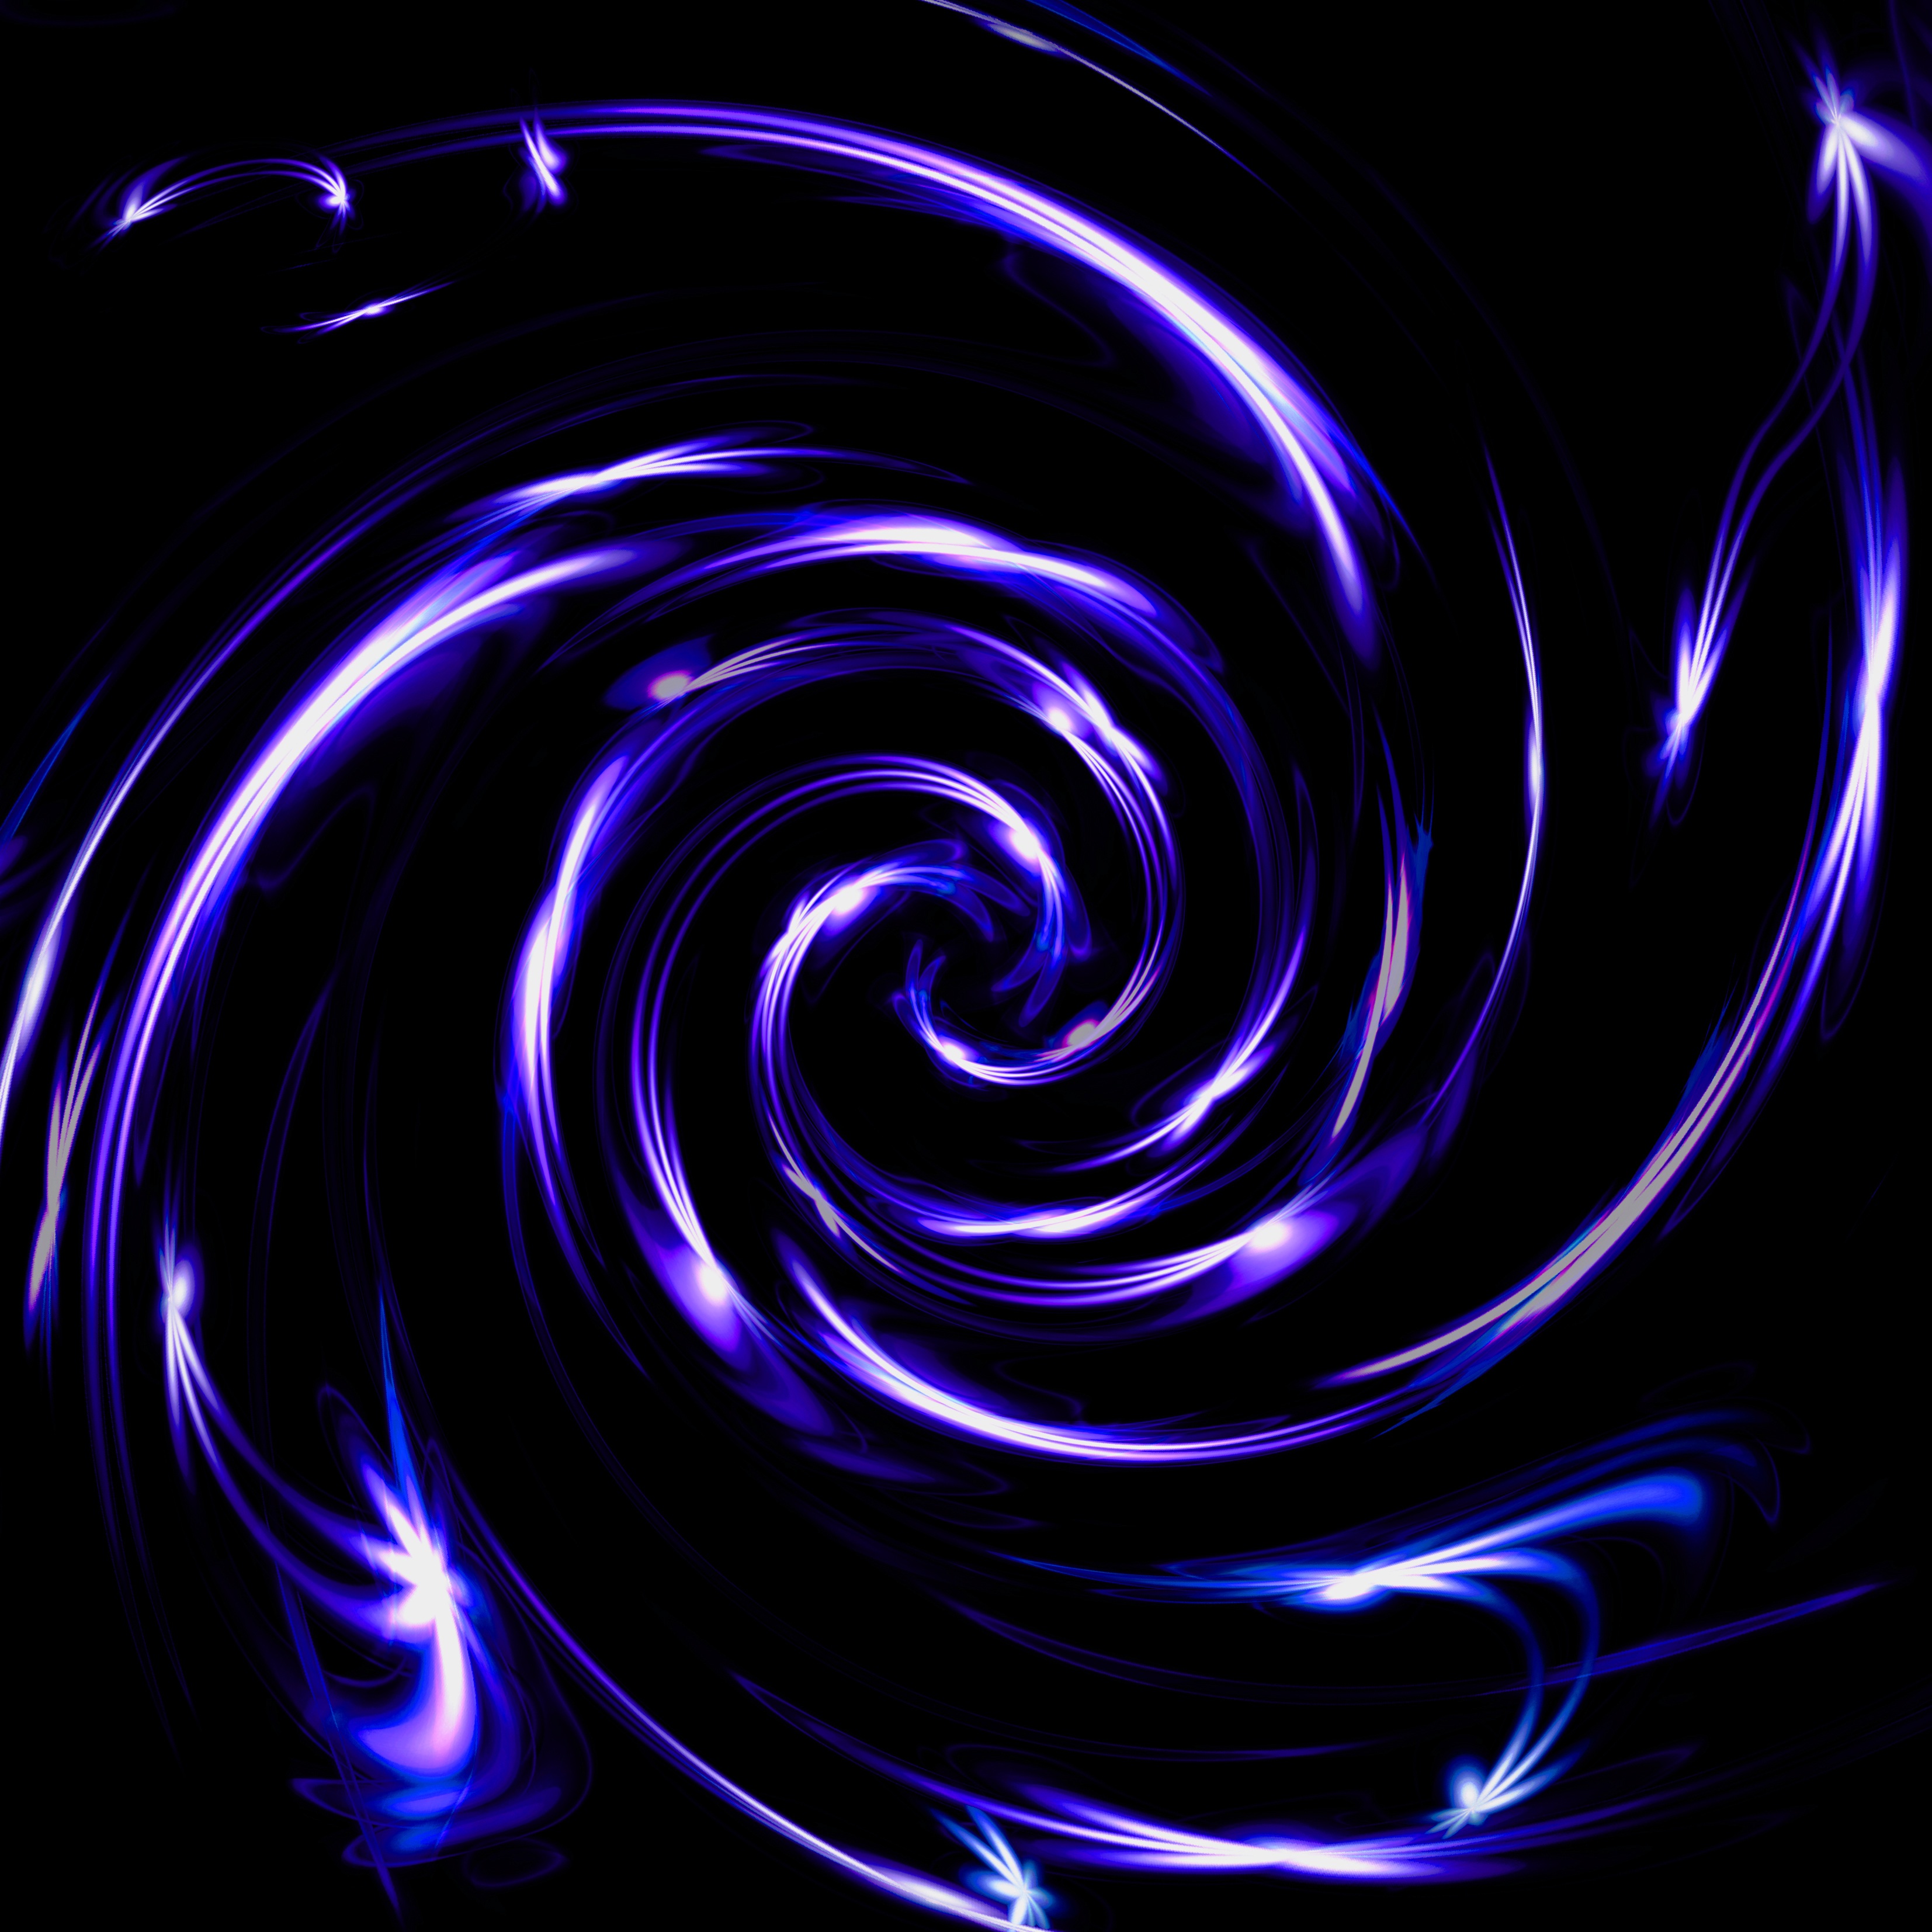 Free Image, abstract, spiral, wave, number, pattern, line, color, flame, blue, circle, neon, background image, font, lines, illustration, digital, graphic, vibrations, rotors, luminosity, strudel, image editing, eddy, sog, light flowers, vortex